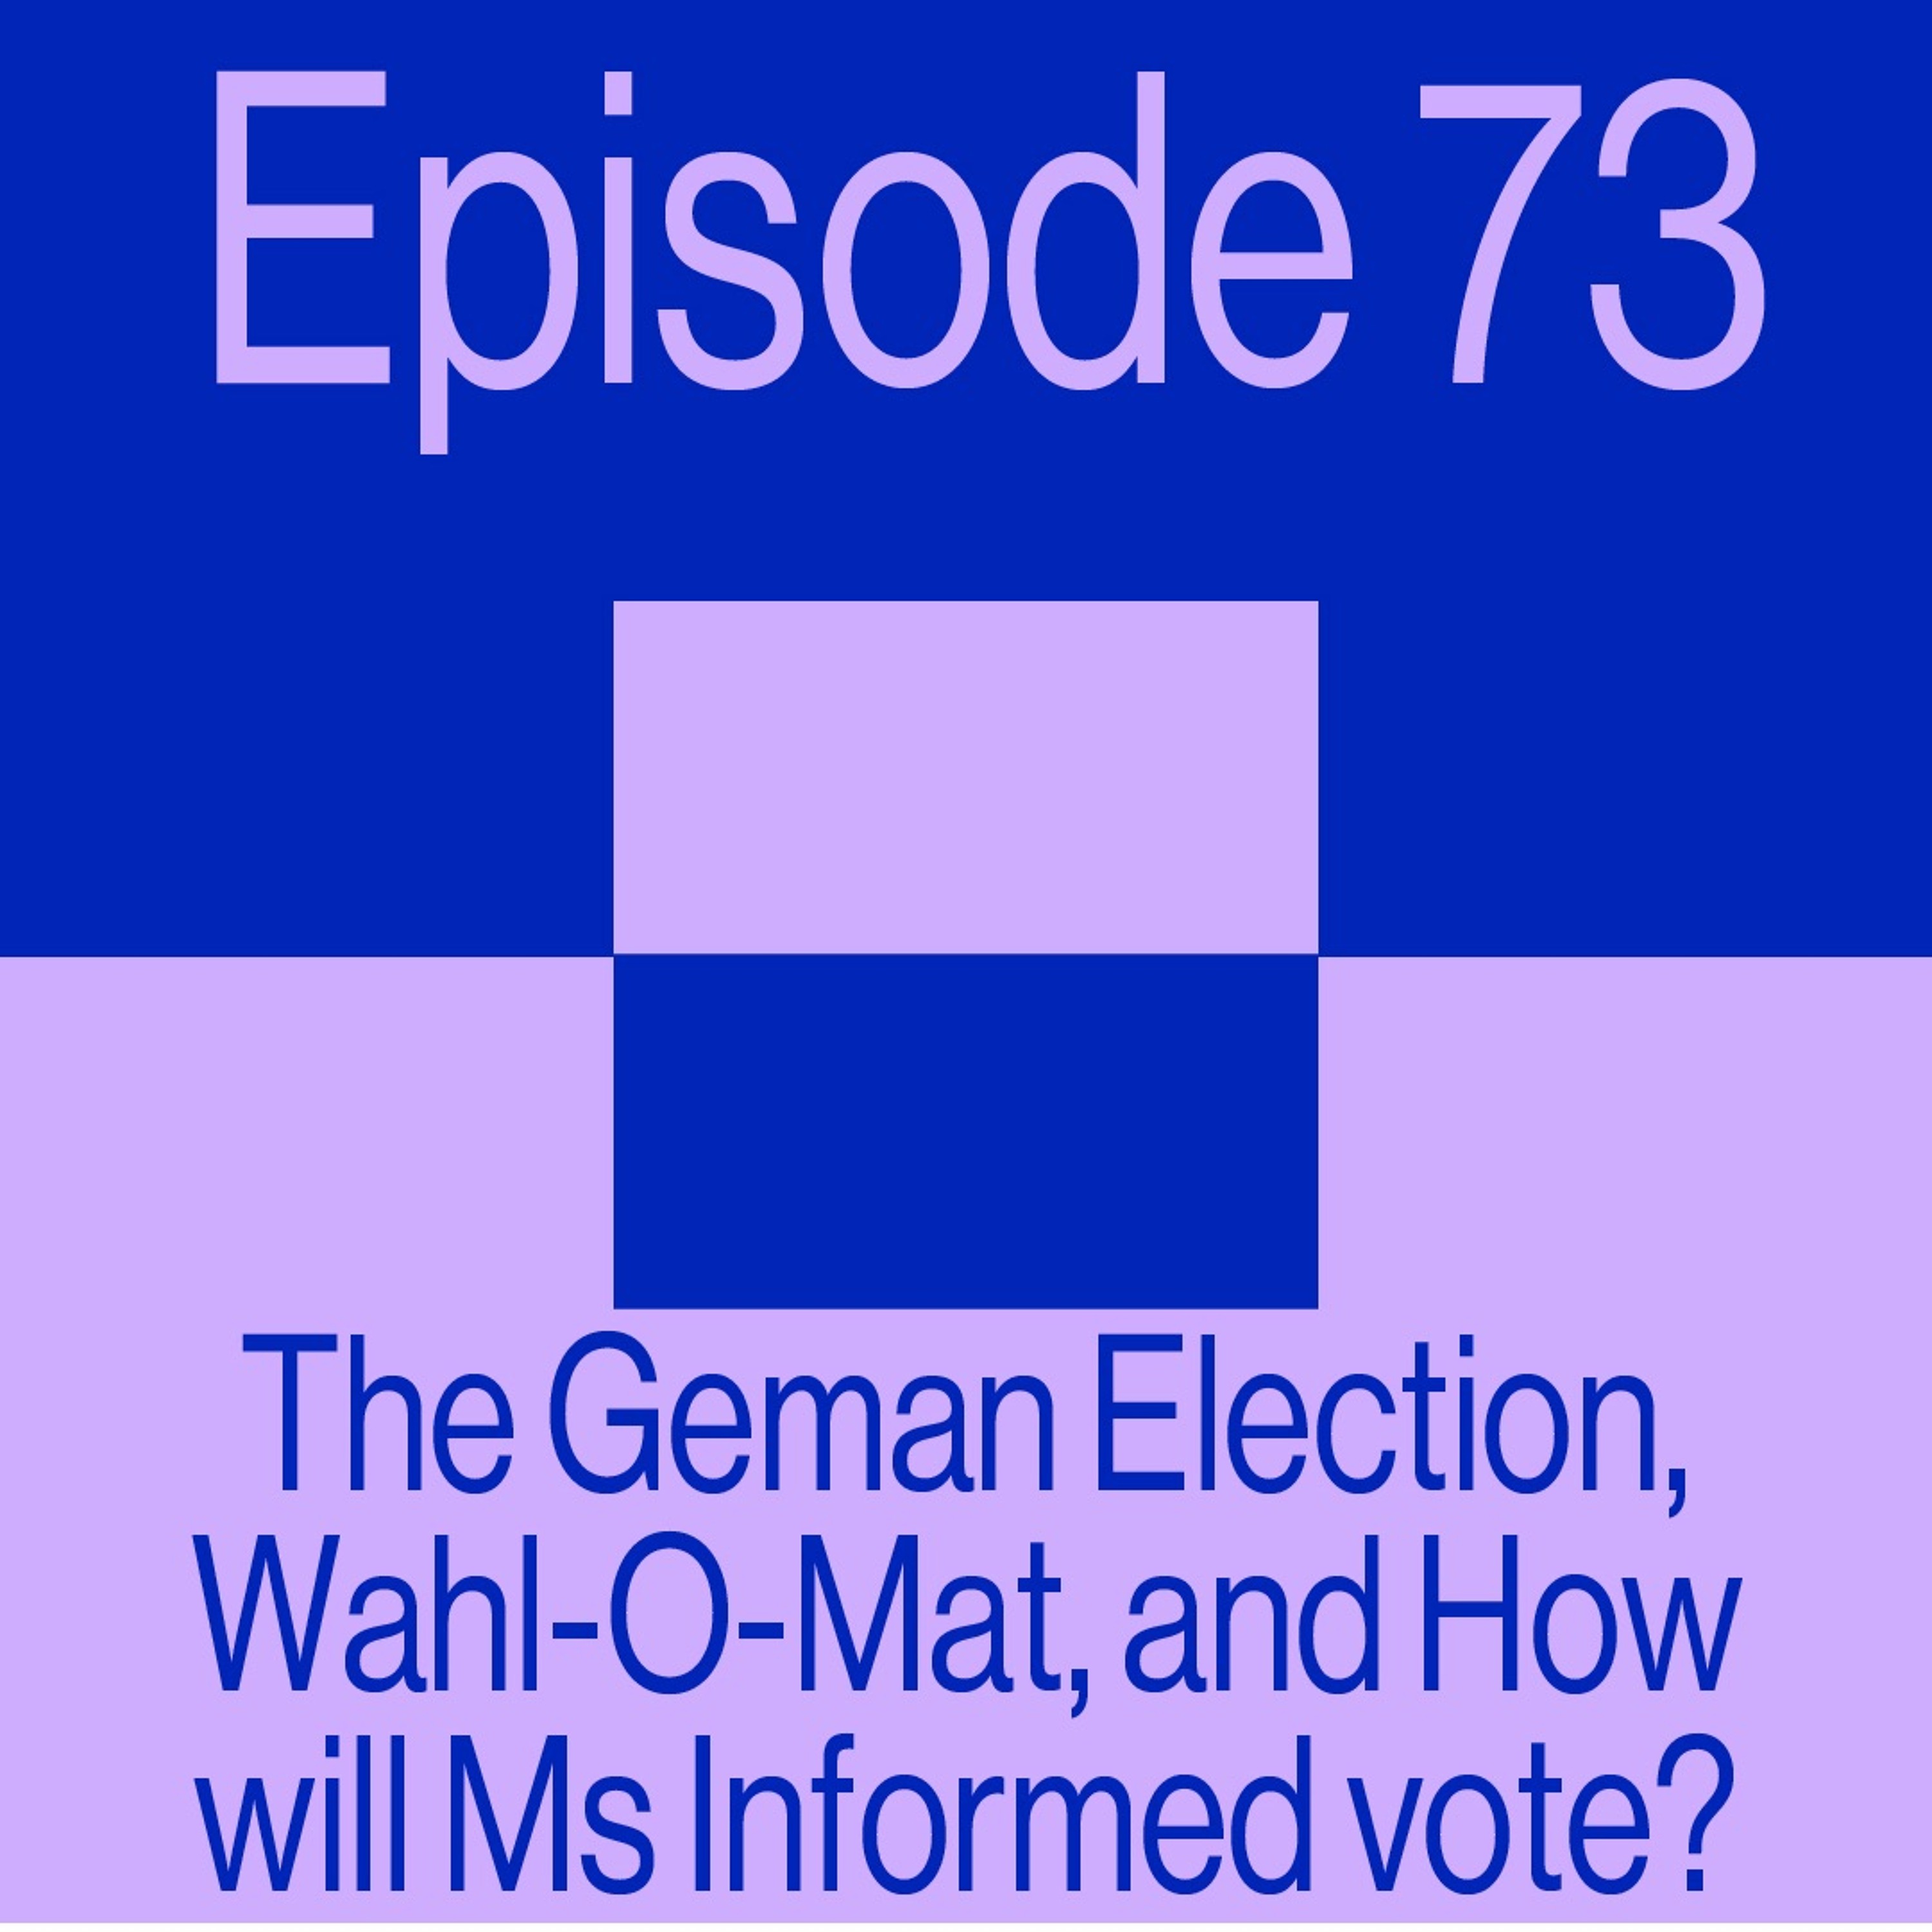 Episode 73: The German Election, Wahl-o-Mat, and how will Ms Informed vote?